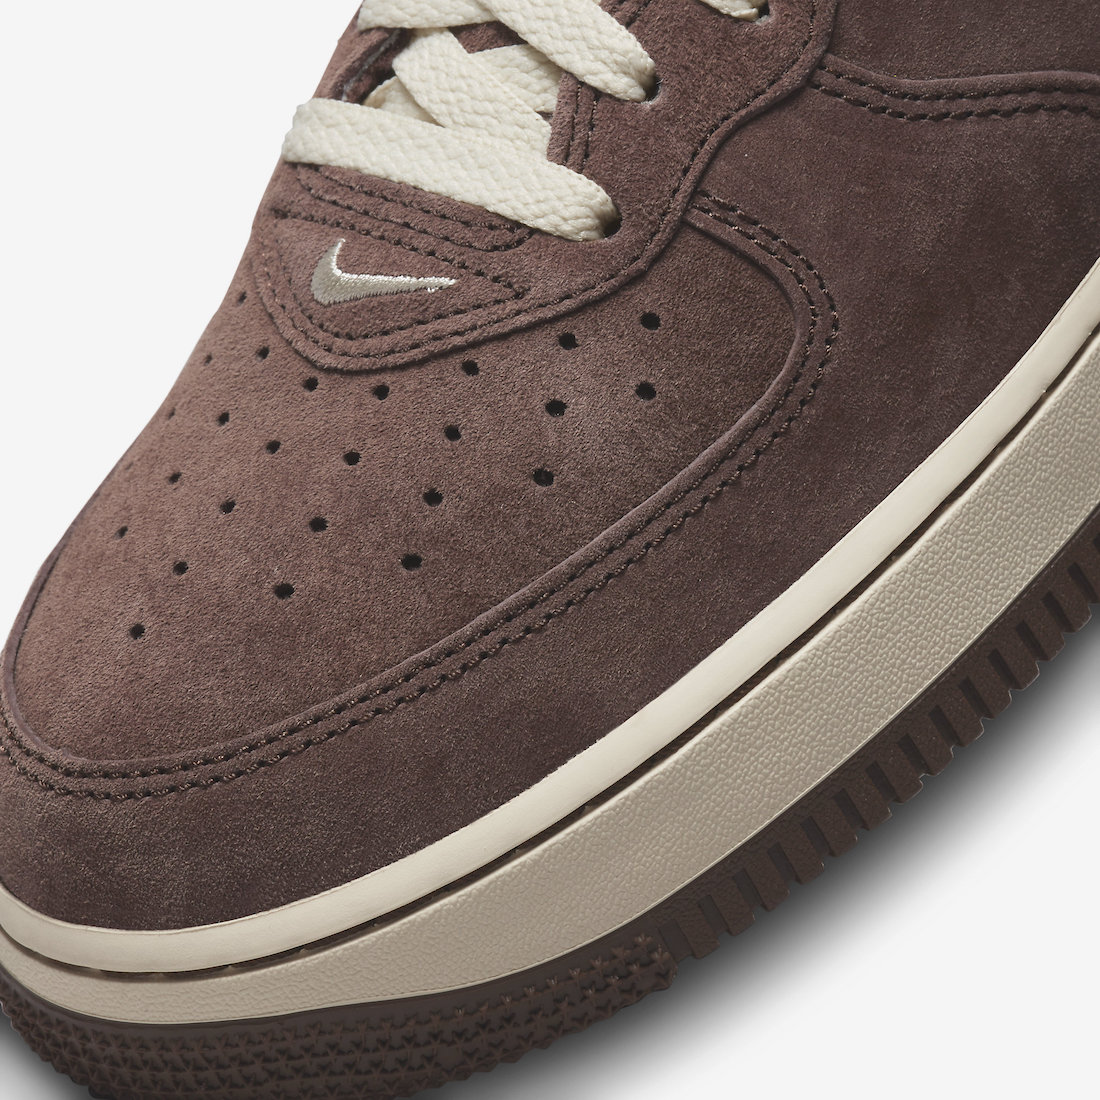 Nike Air Force 1 Mid Chocolate DM0107 200 Release Date 6